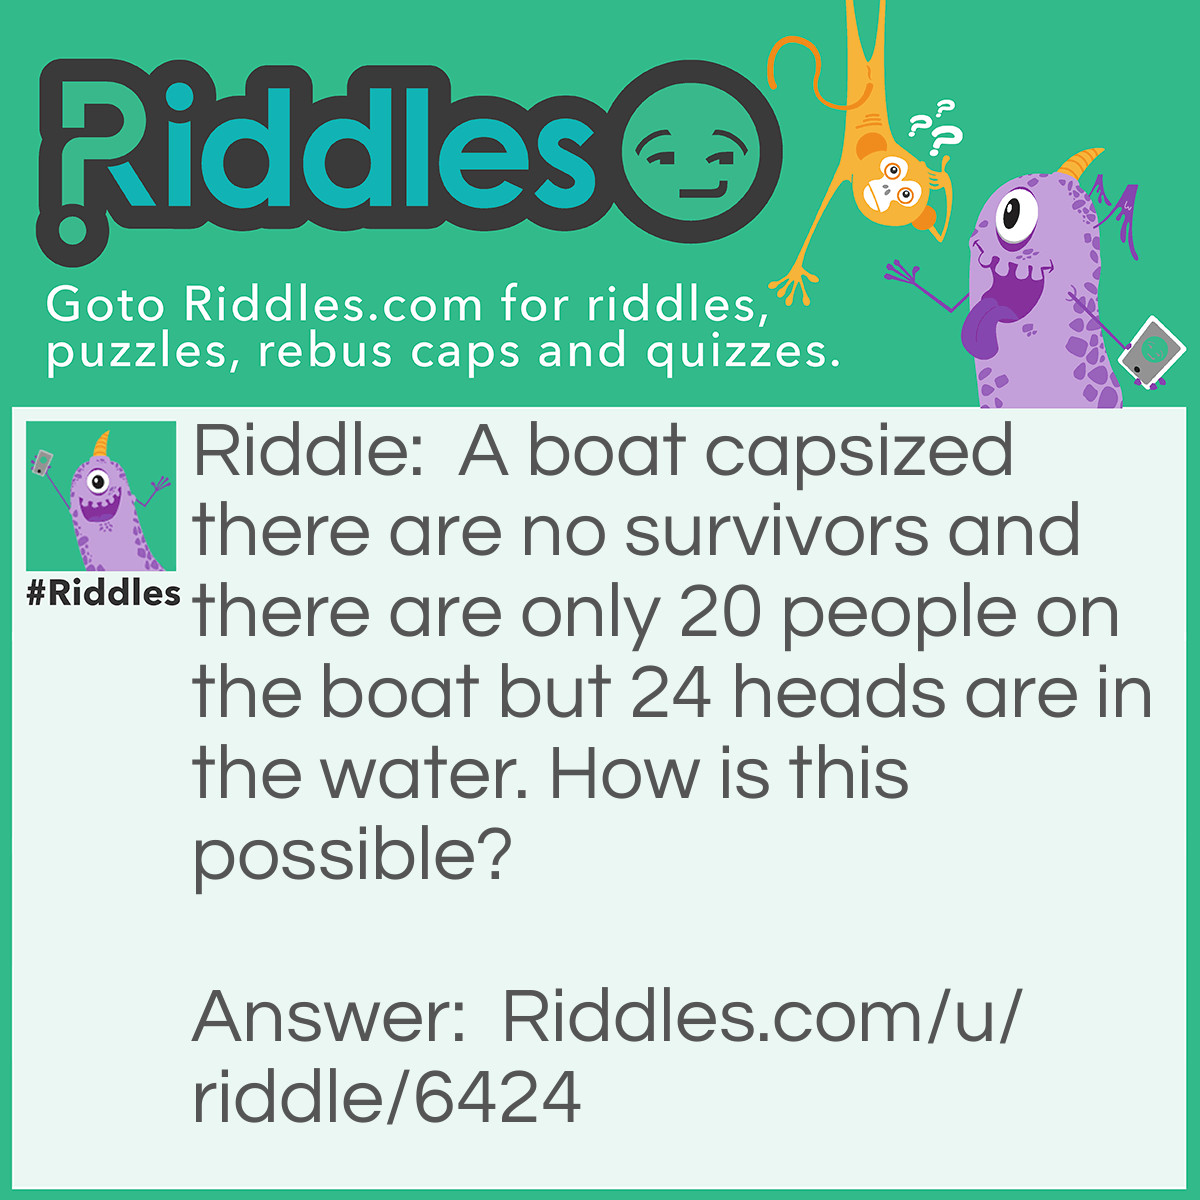 Riddle: A boat capsized there are no survivors and there are only 20 people on the boat but 24 heads are in the water. How is this possible? Answer: Easy twenty foreheads.